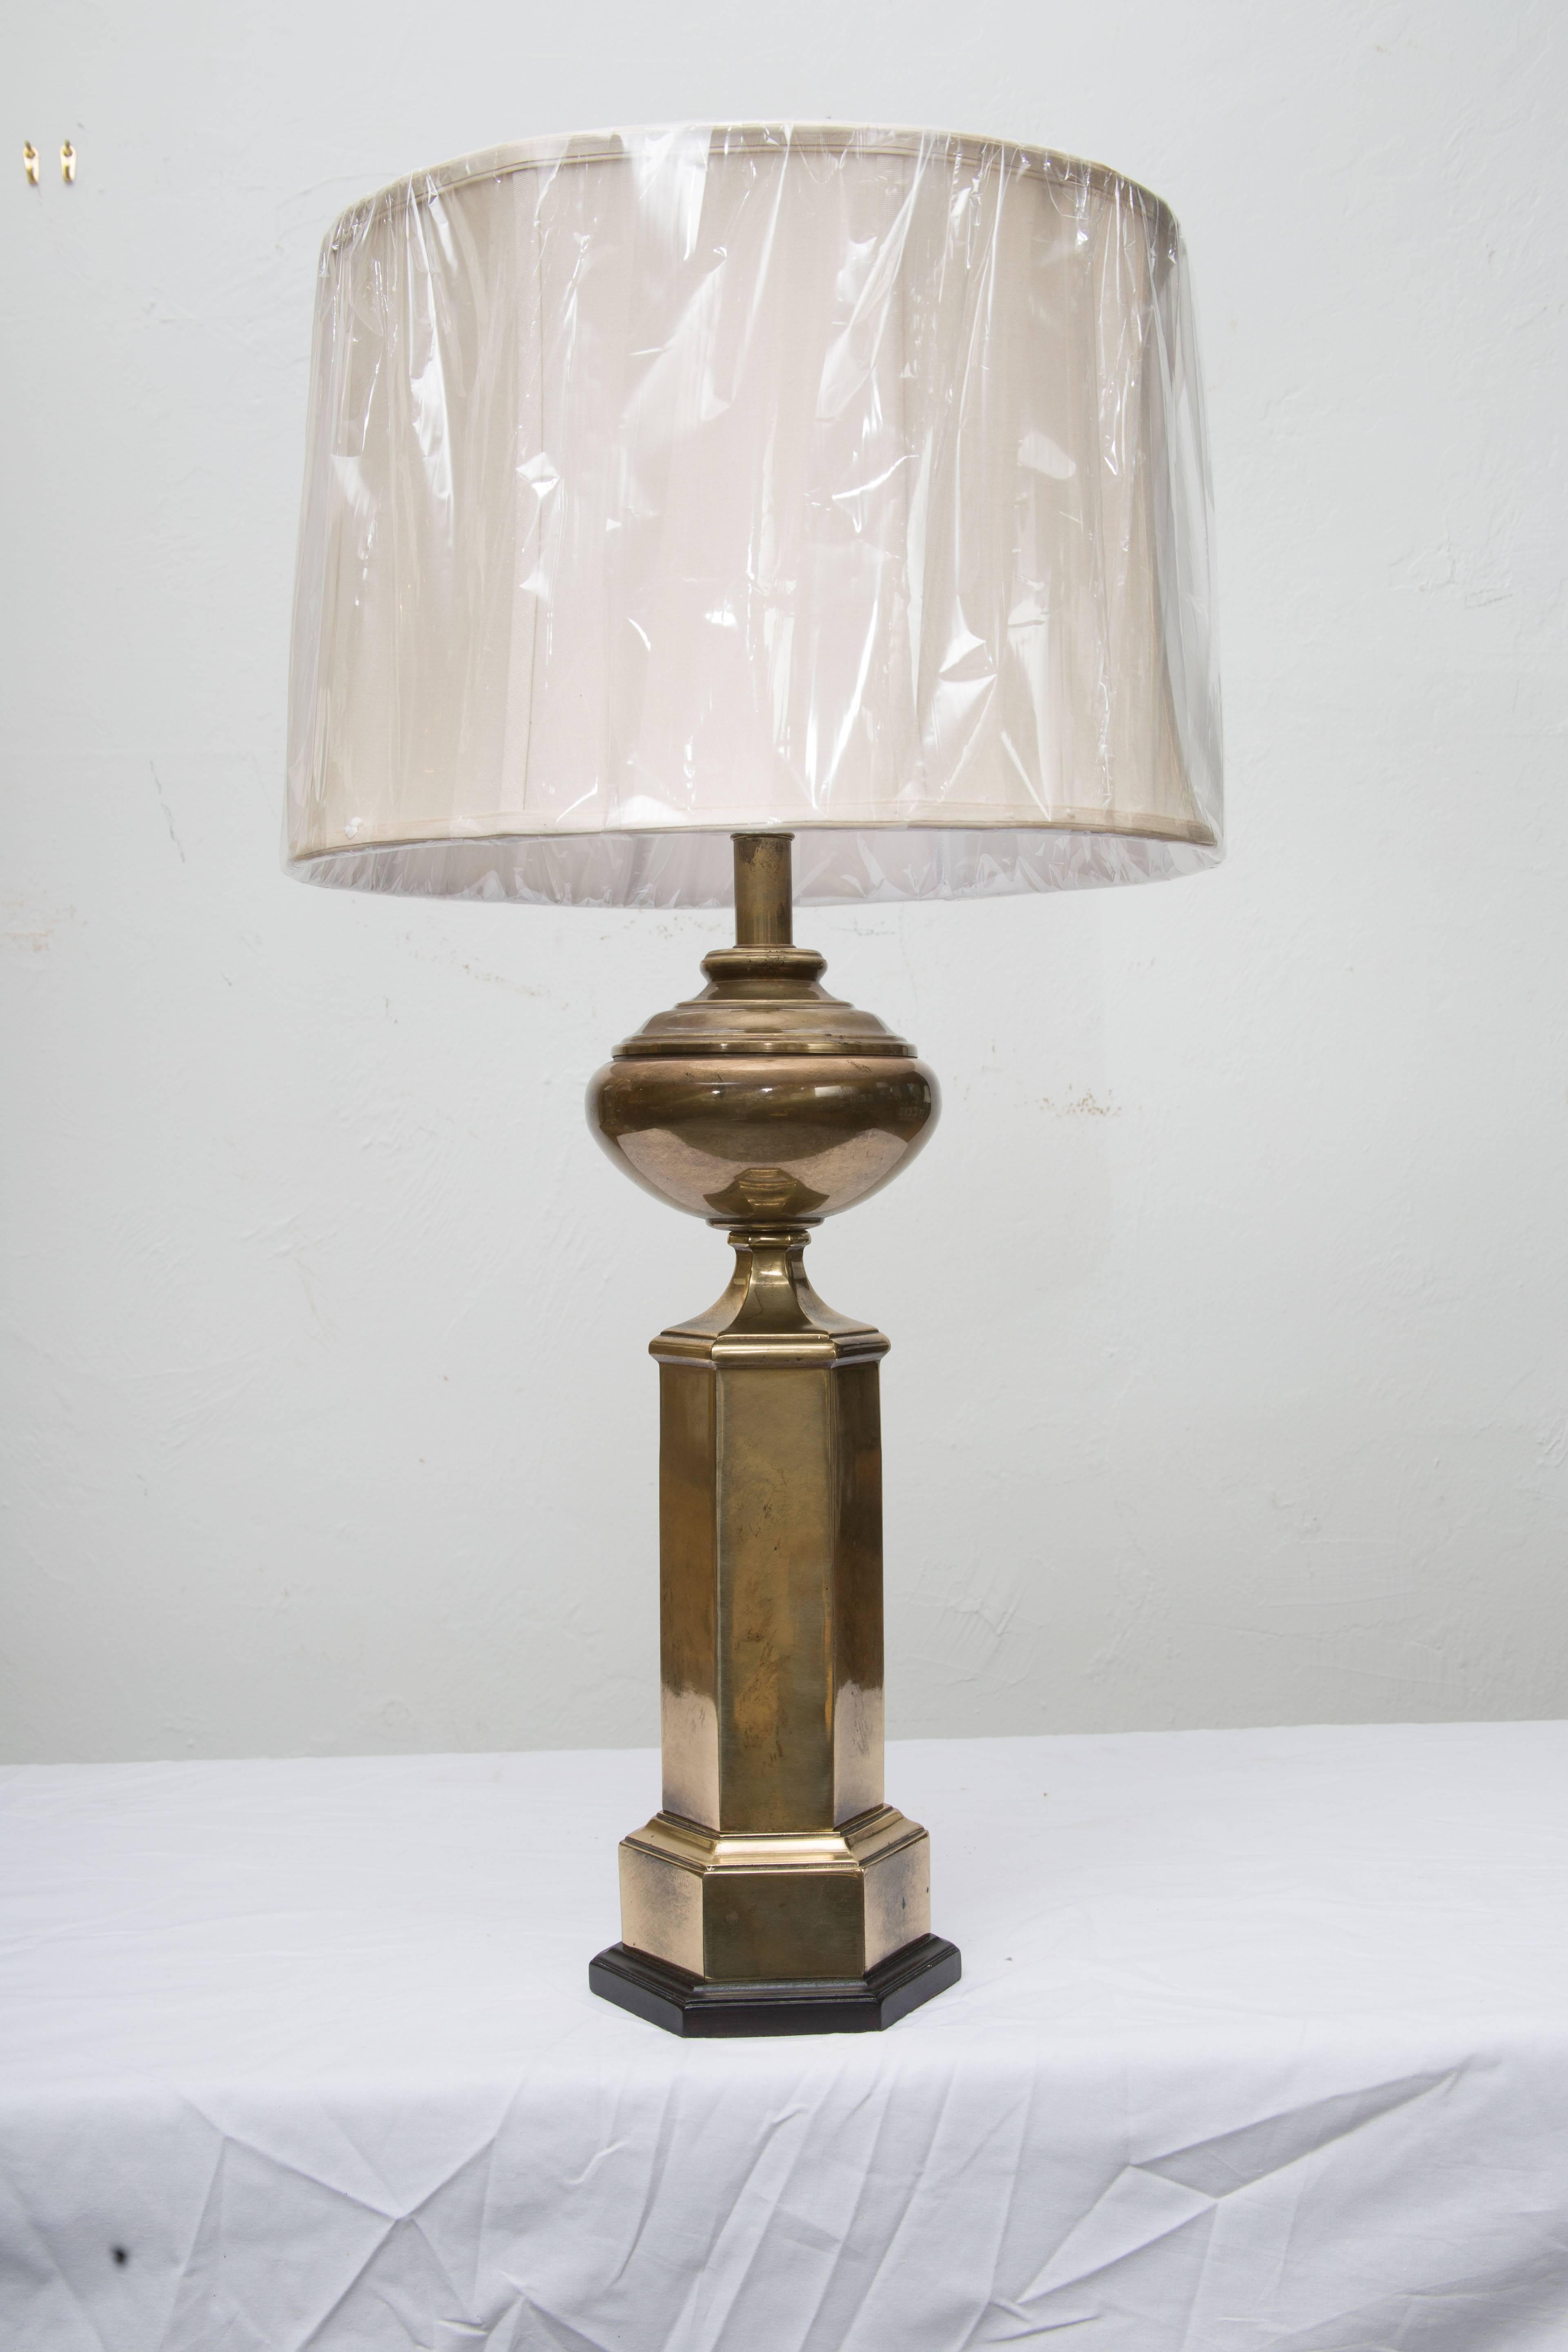 This Classic pair of hexagonal brass lamps has an antique finish and wood base offering a perfect accent for a traditional or contemporary setting. The lamps manufactured by Frederick Cooper are very high quality.